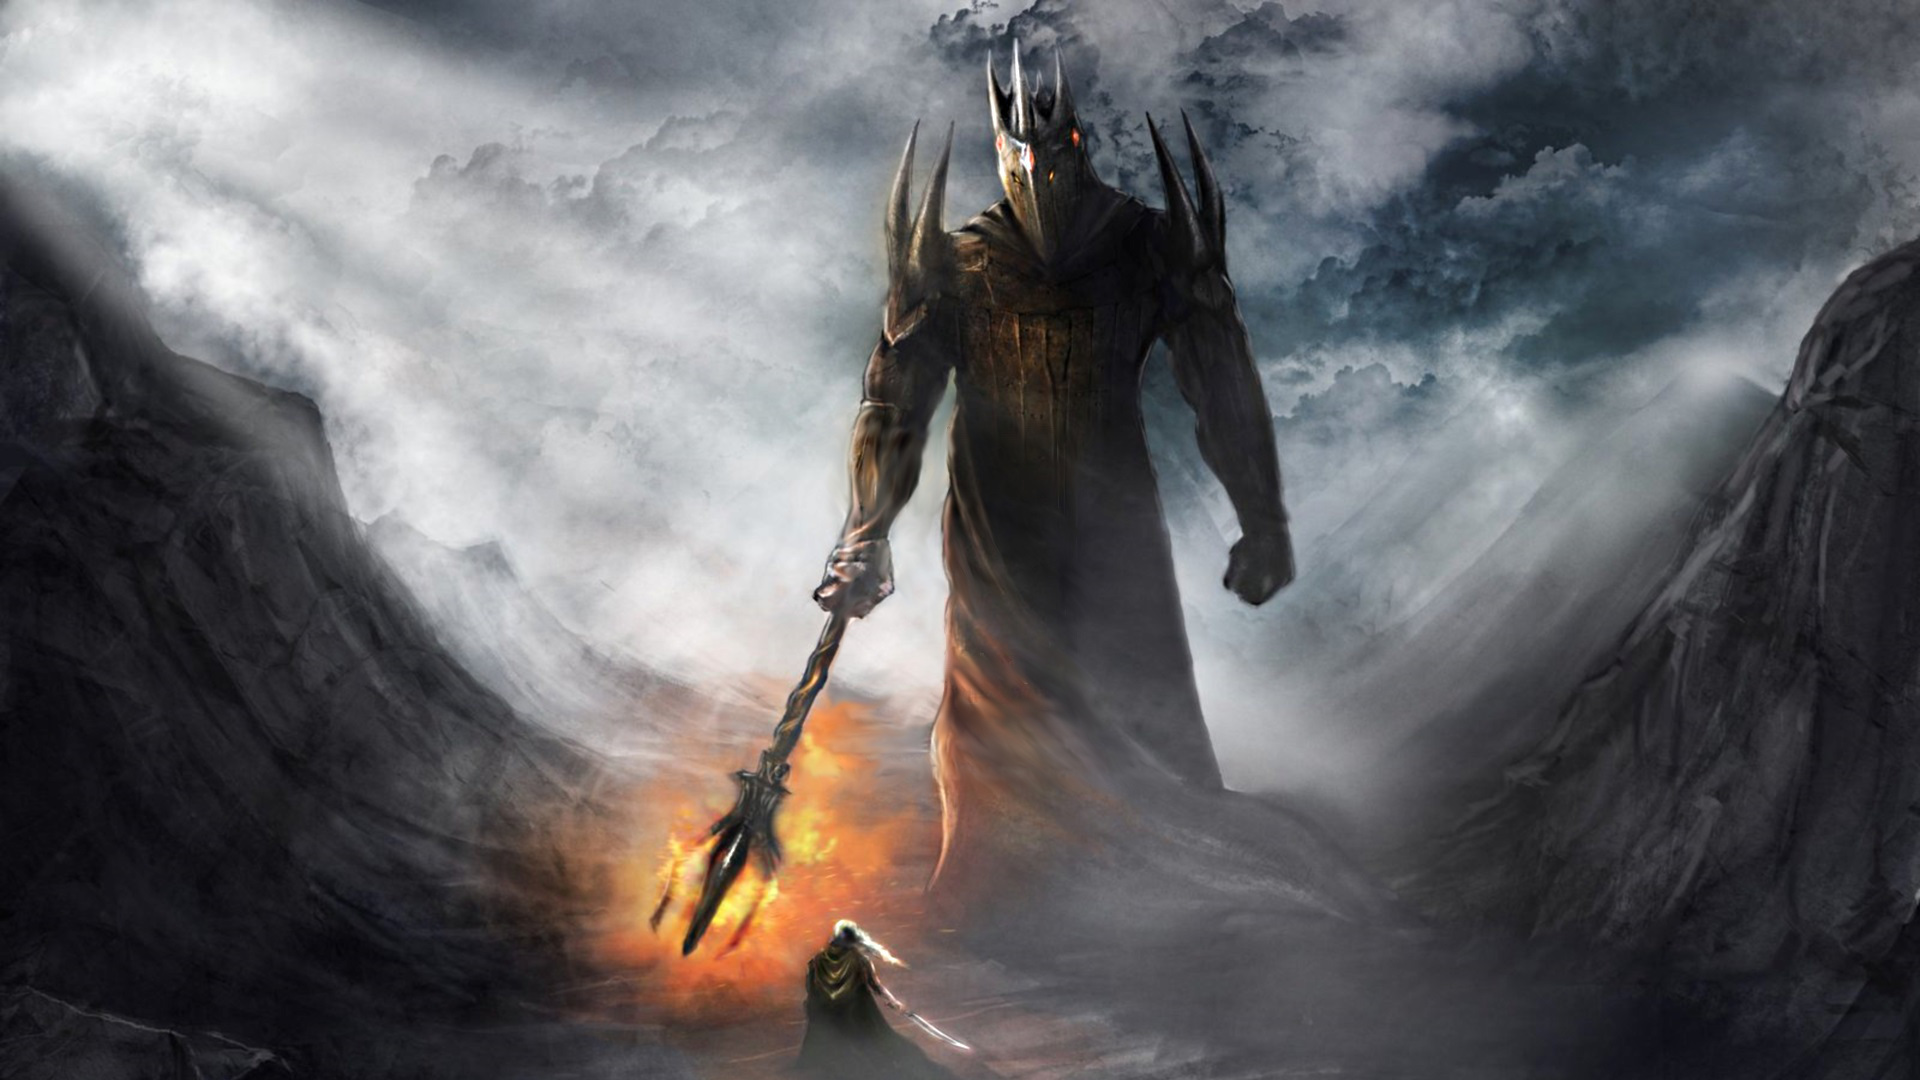 lord of the rings, the lord of the rings, fantasy, morgoth (lord of the rings)